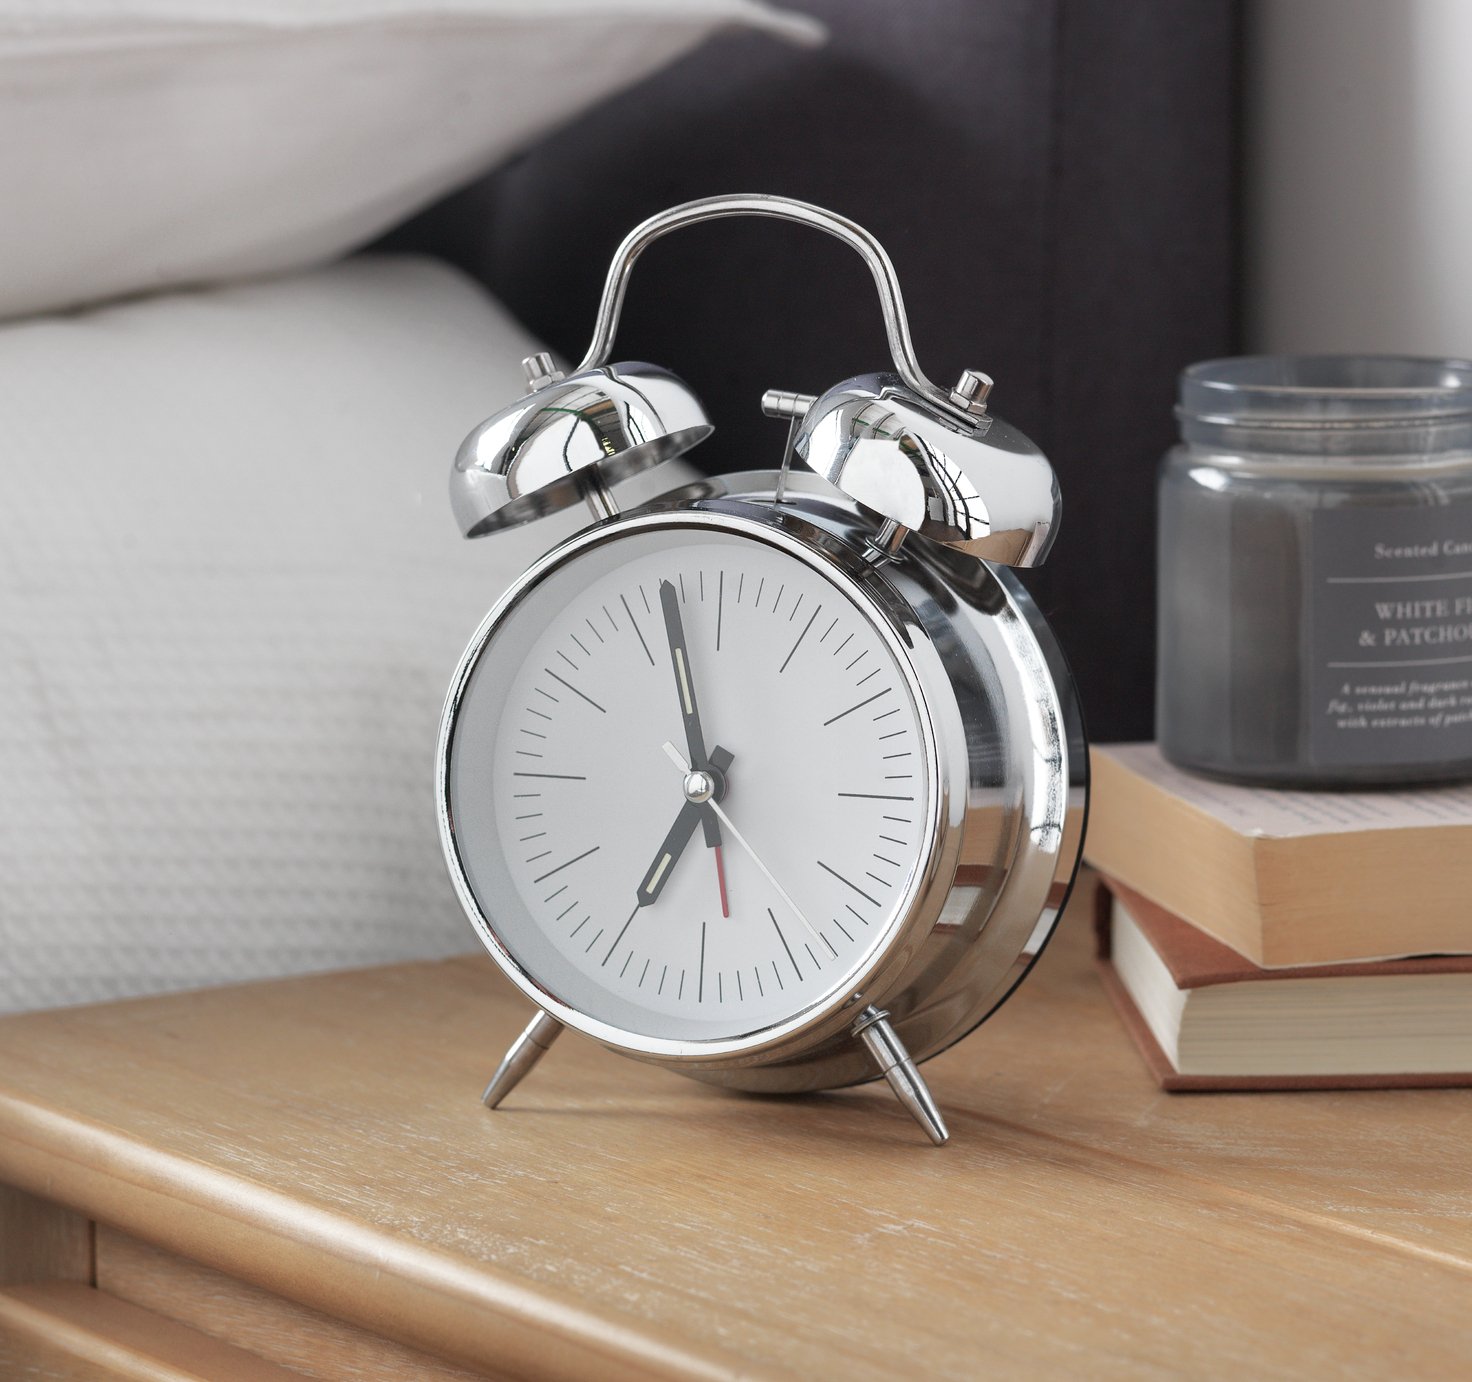 Constant Twin Bell Alarm Clock Review